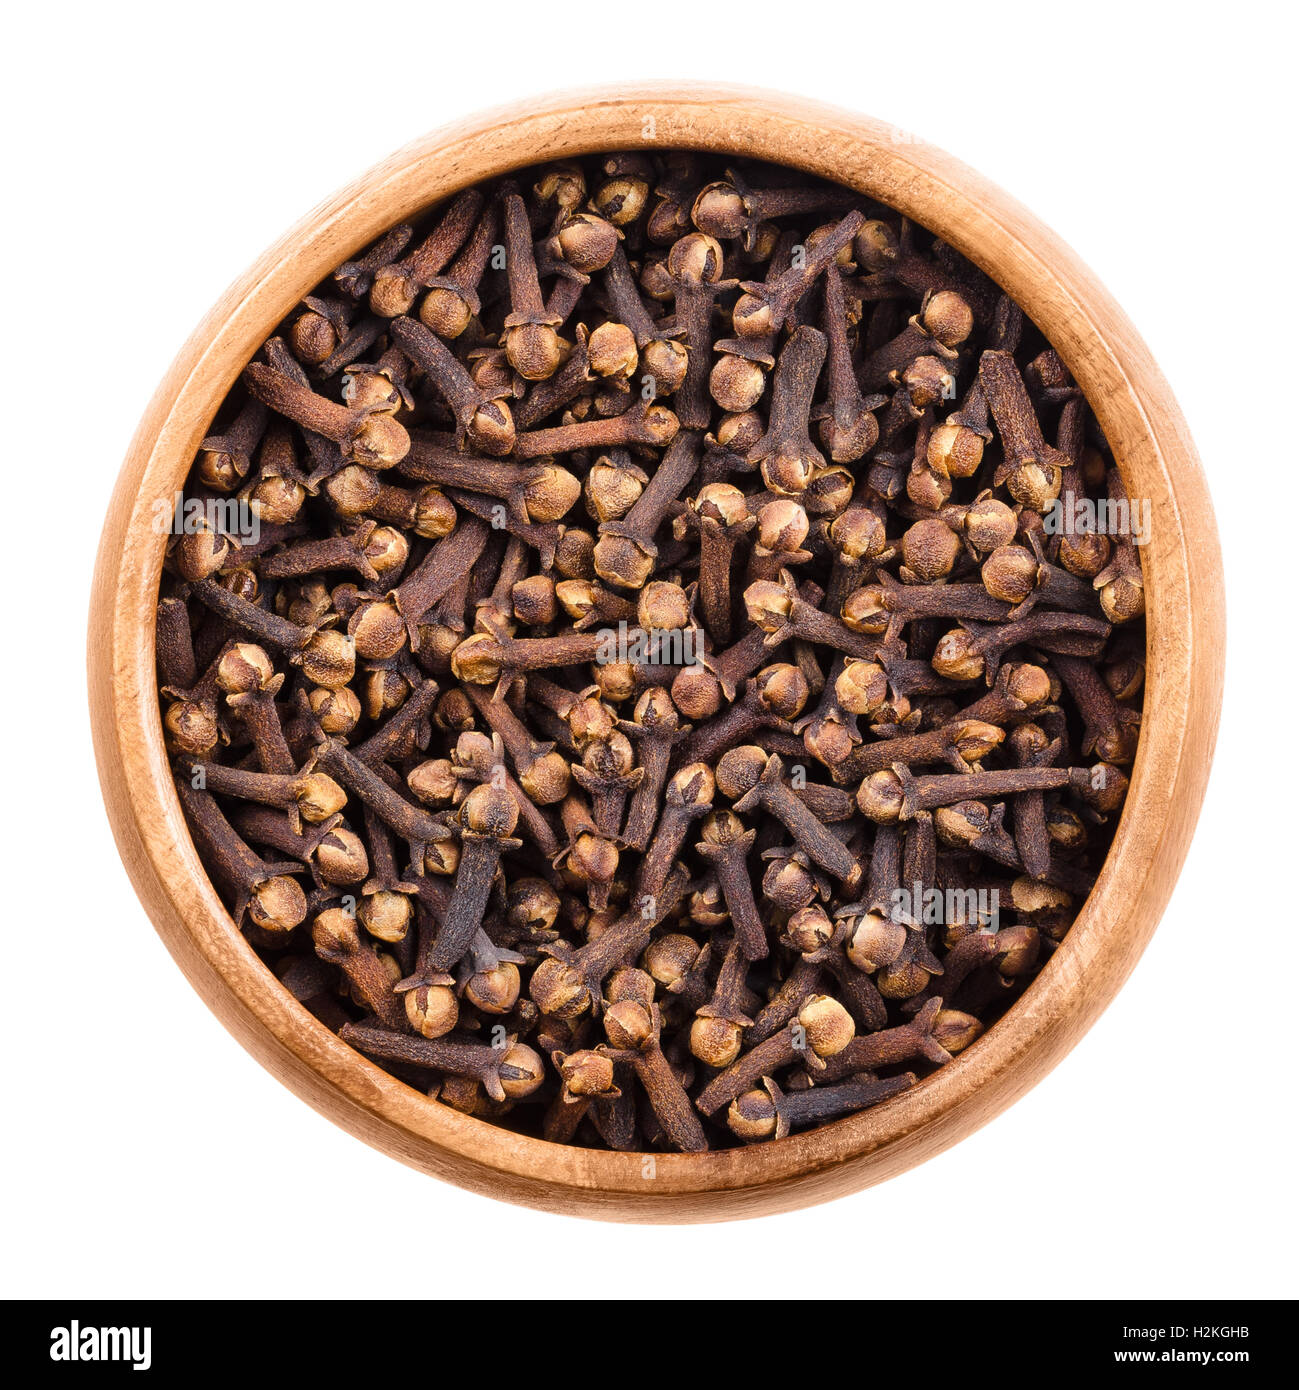 Dried cloves in a wooden bowl on white background. Brown aromatic flower buds of Syzygium aromaticum, commonly used as spice. Stock Photo